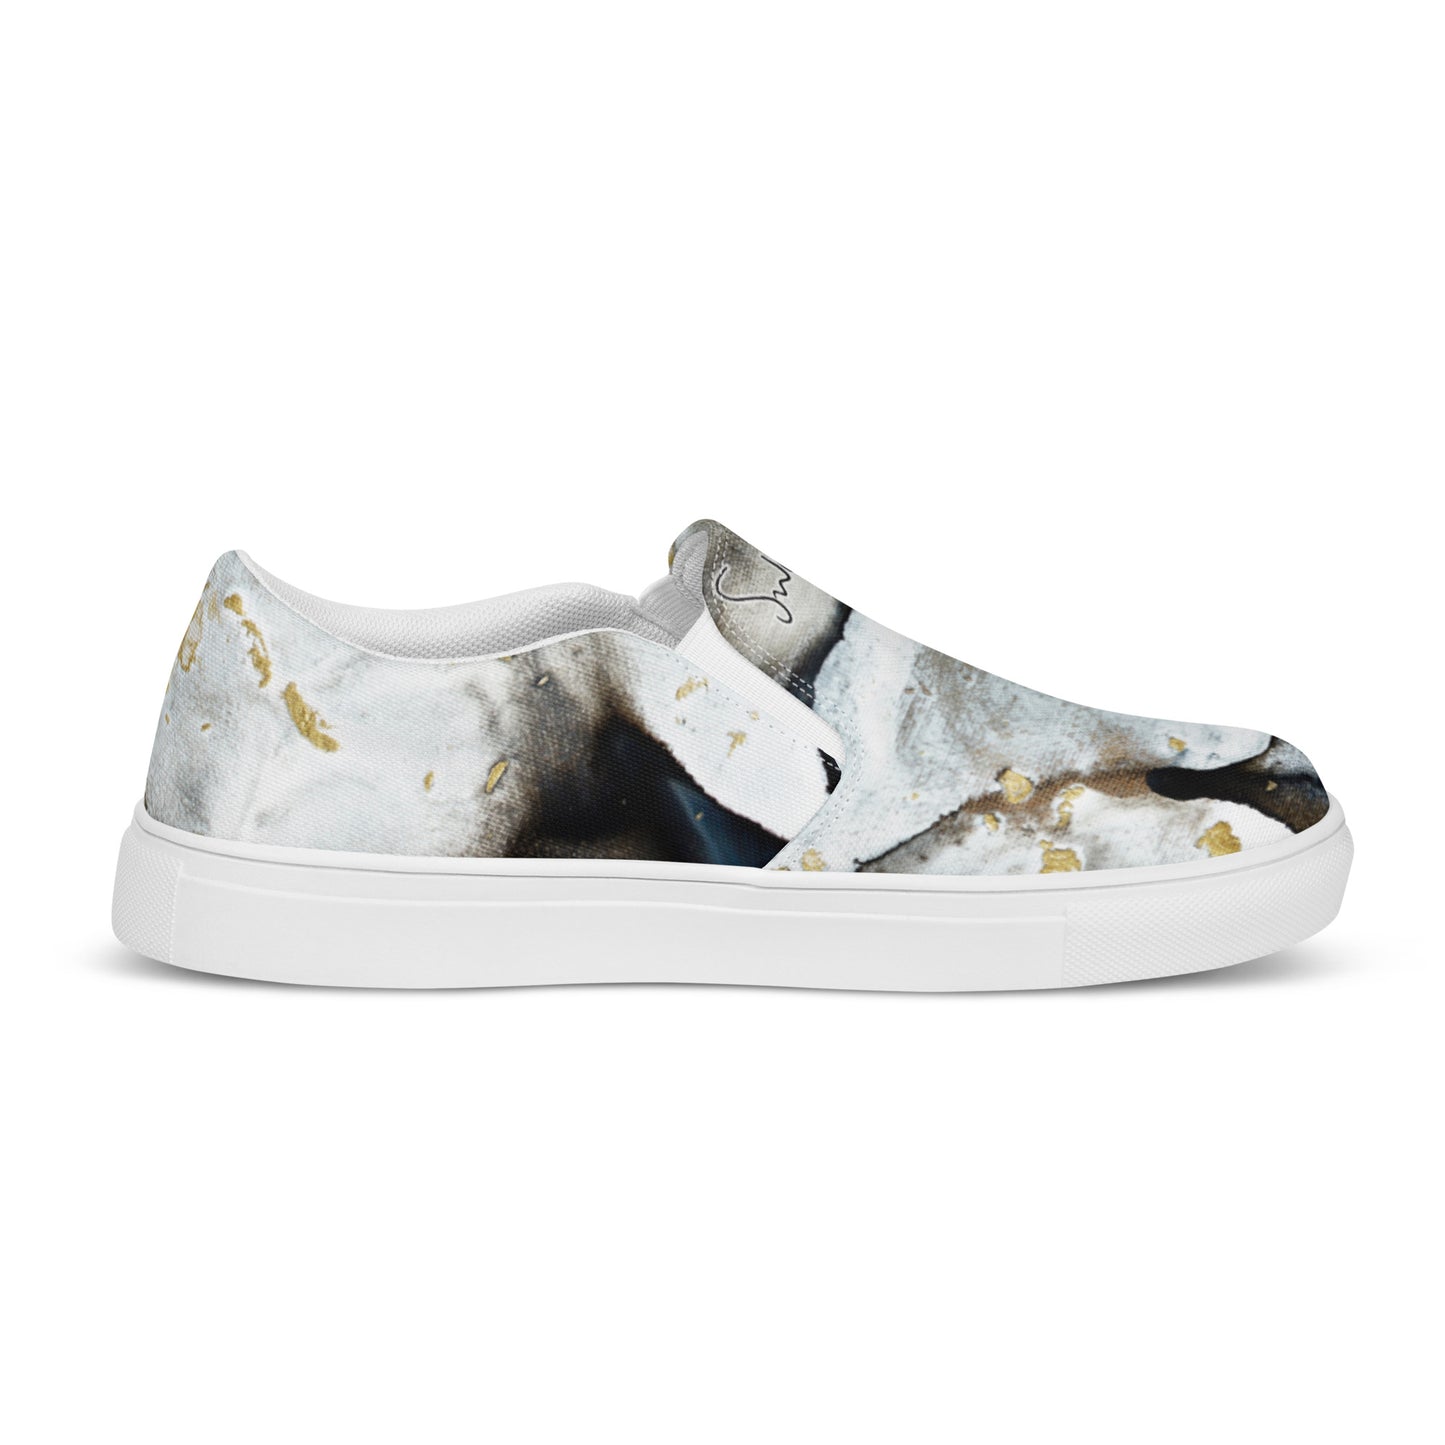 Women’s slip-on canvas shoes - Black and white design